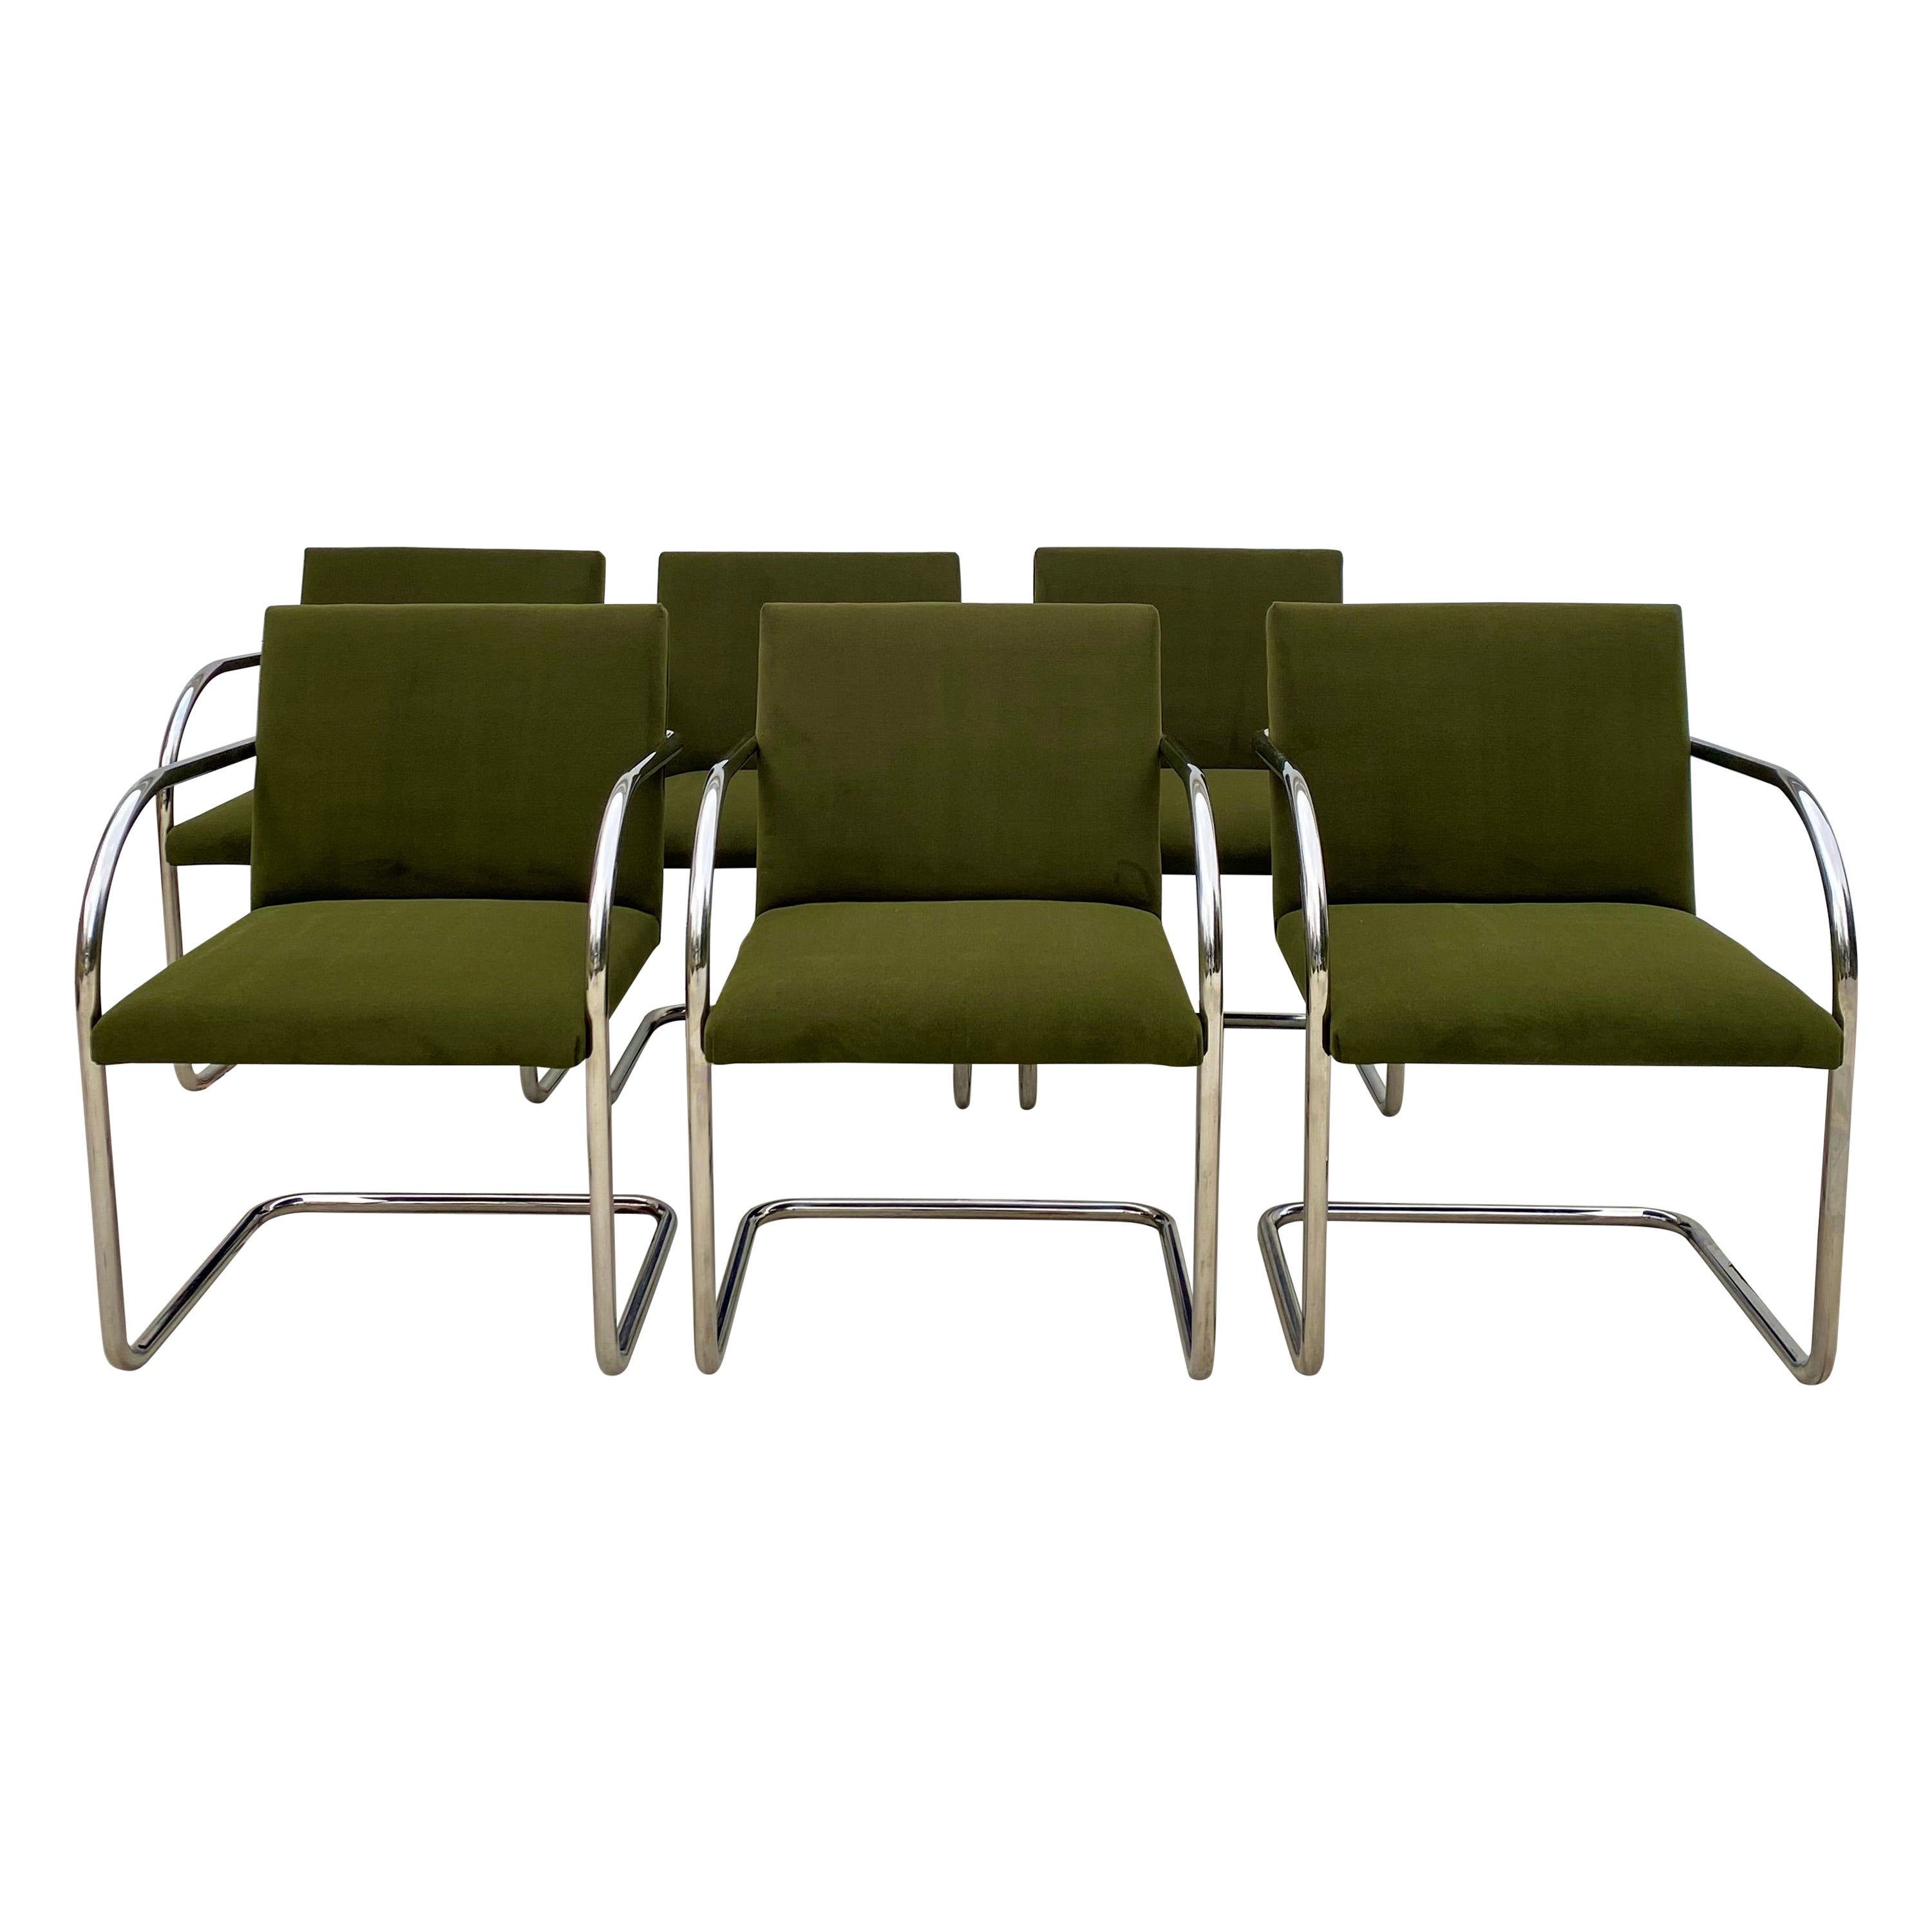 Set of 6 Chrome Mies Van Der Rohe Tubular Brno Chairs by Knoll in Green Velvet